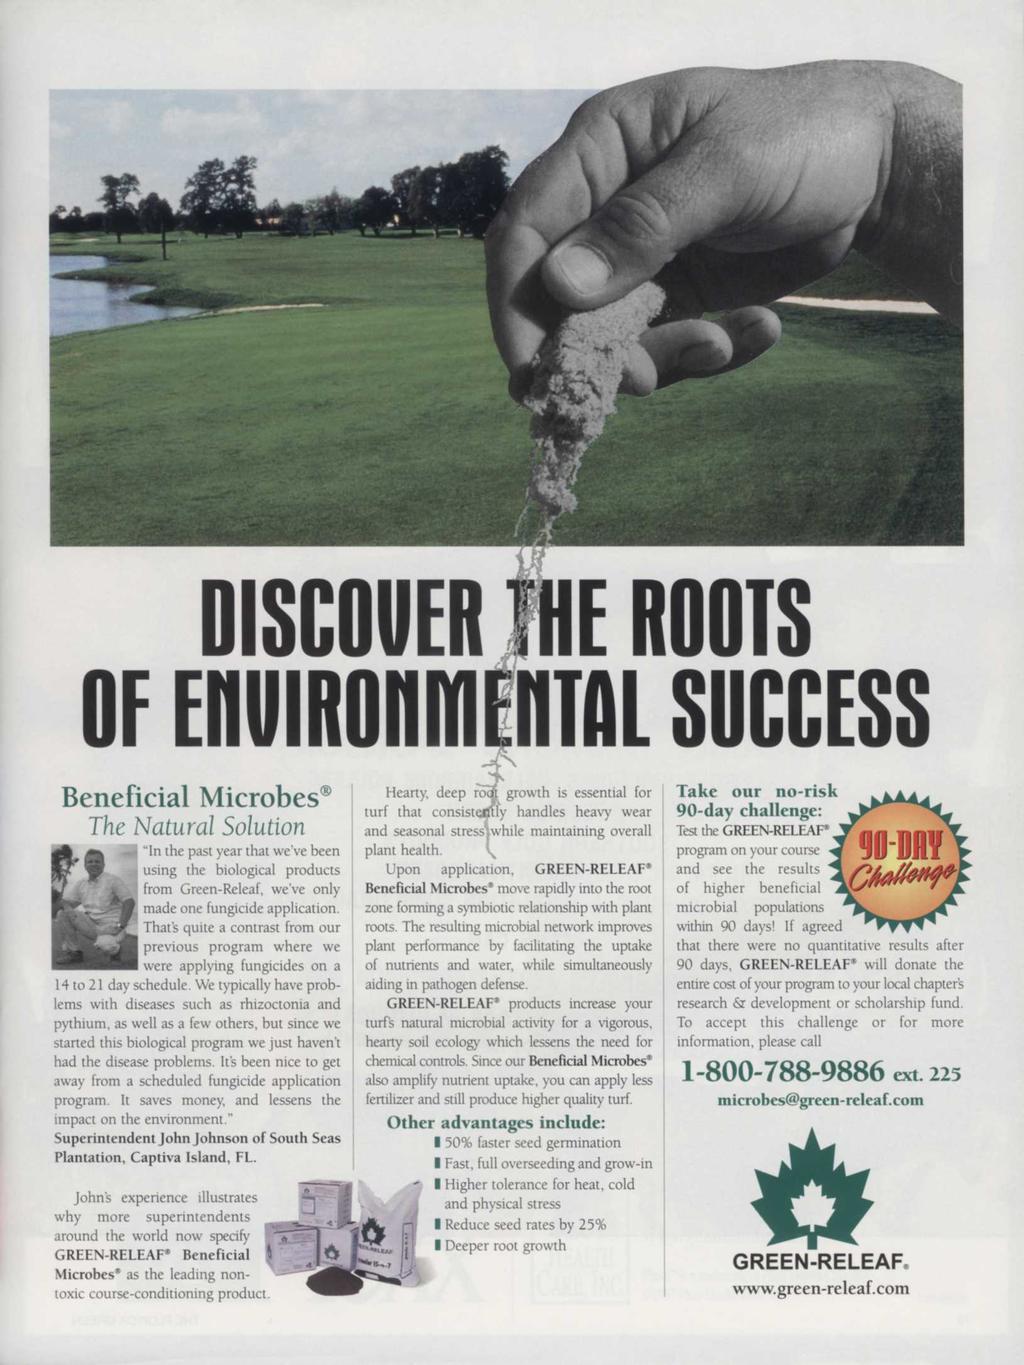 Beneficial Microbes The Natural Solution l "In the past year that we've been I using the biological products n from Green-Releaf, we've only \ made one fungicide application.